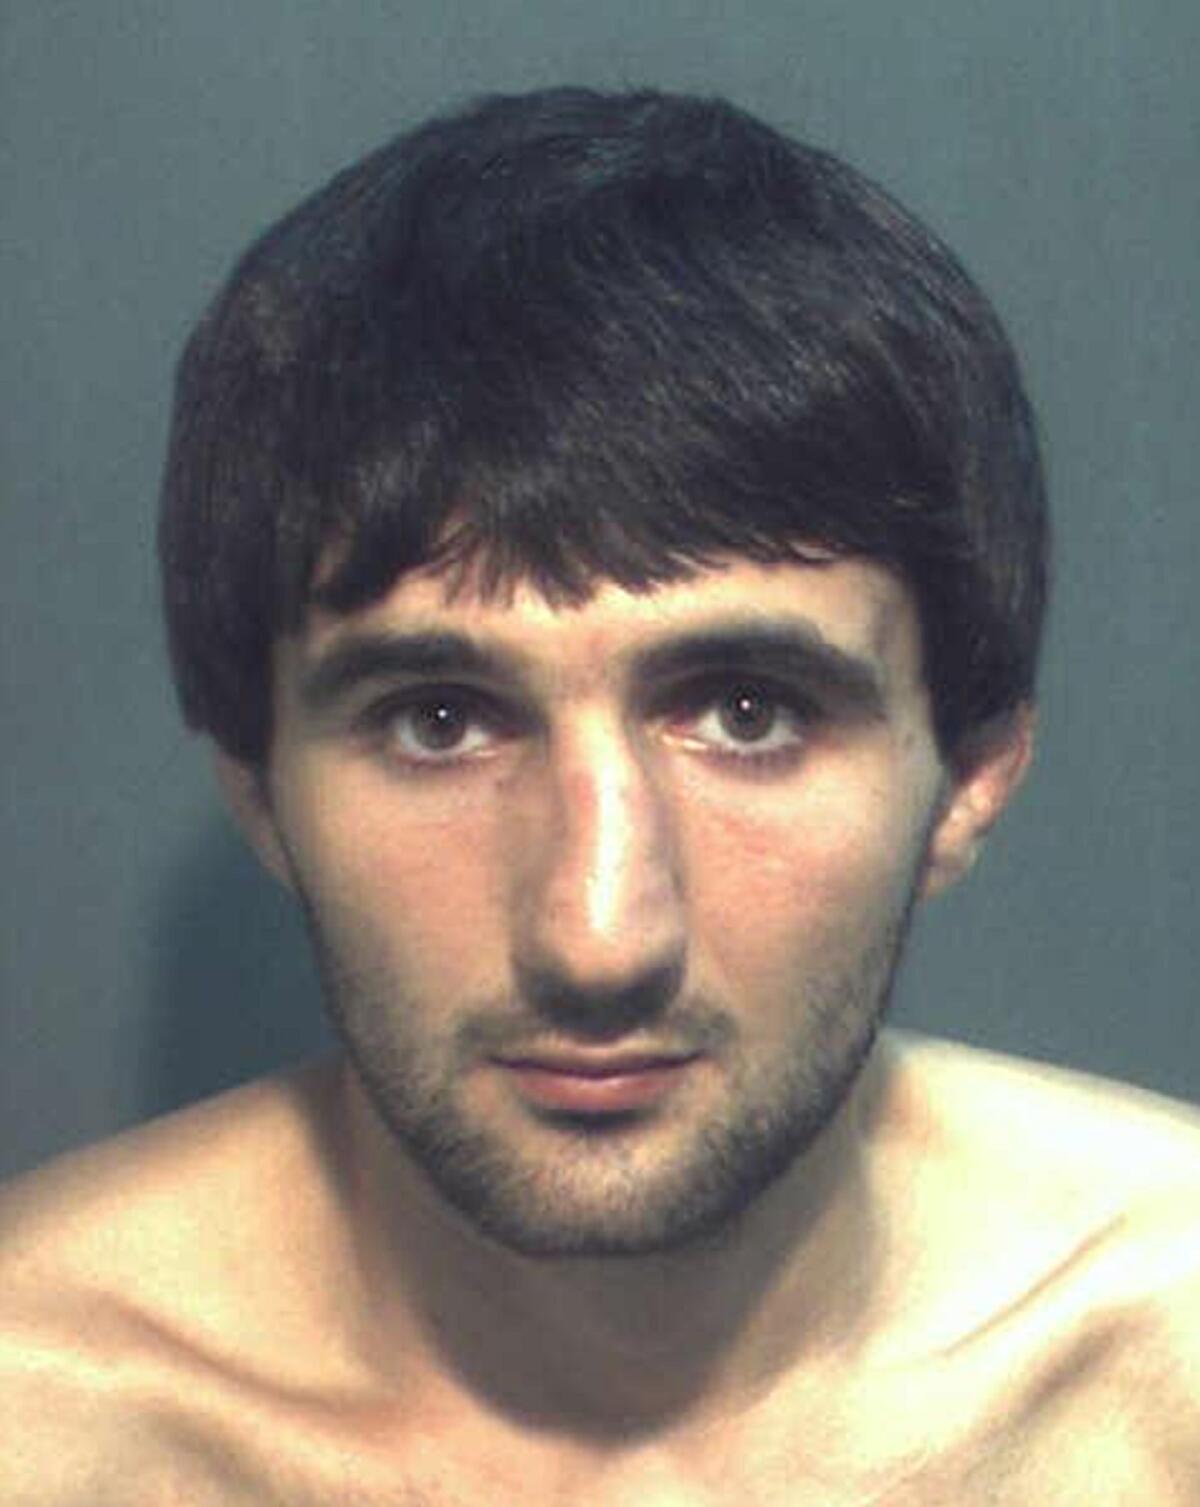 This undated mugshot released by the Orange County (Fla.) Sheriff's Office shows Ibragim Todashev, 27. Todashev was identified by the FBI as the man who was shot by an FBI agent on May 22 while being questioned in connection with the Boston Marathon bombing.